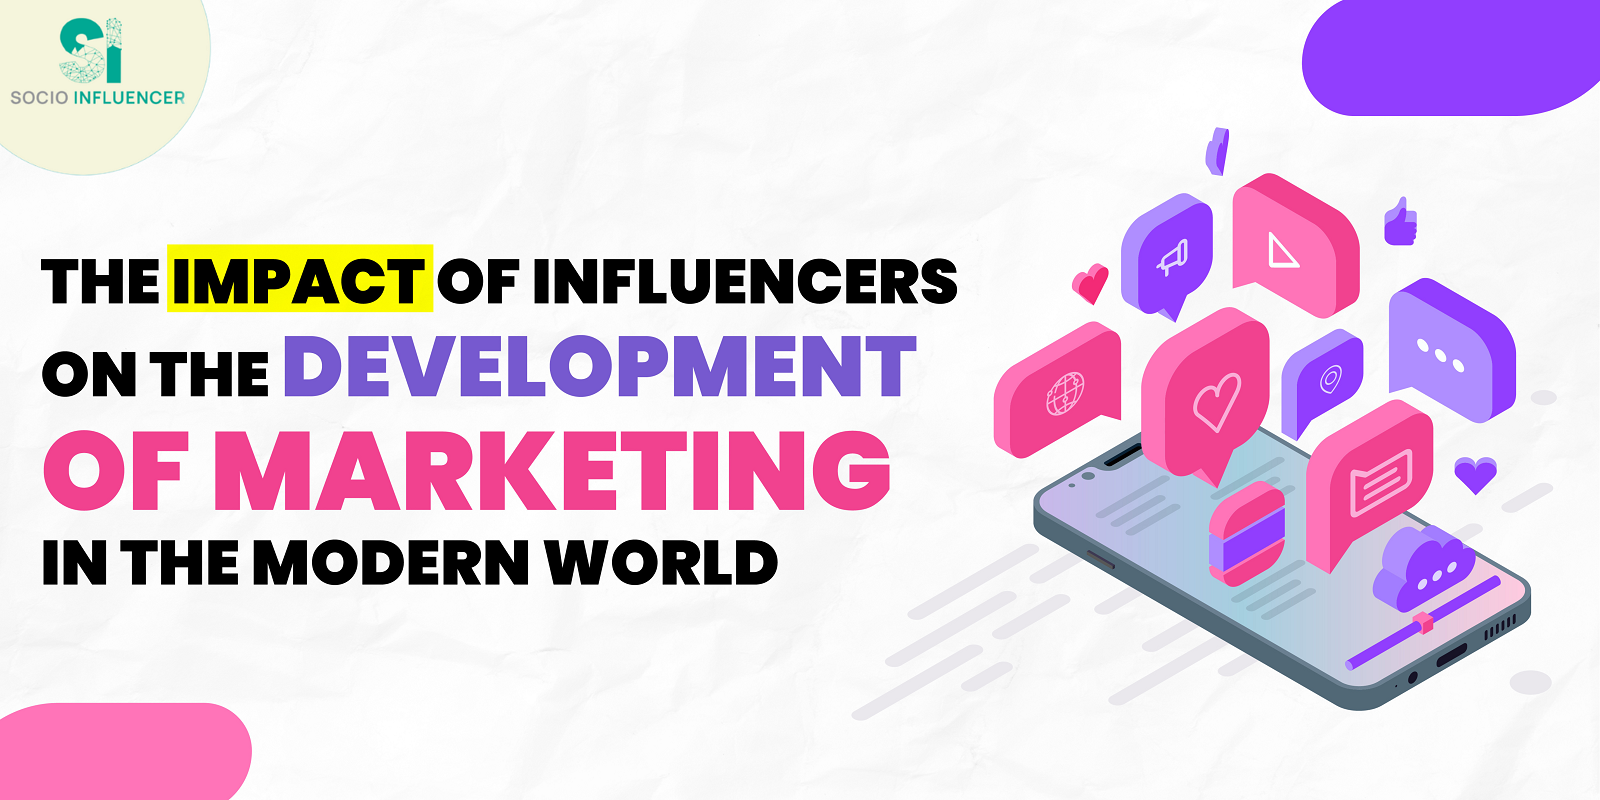 The Impact of Influencers on the Development of Marketing in the Modern World